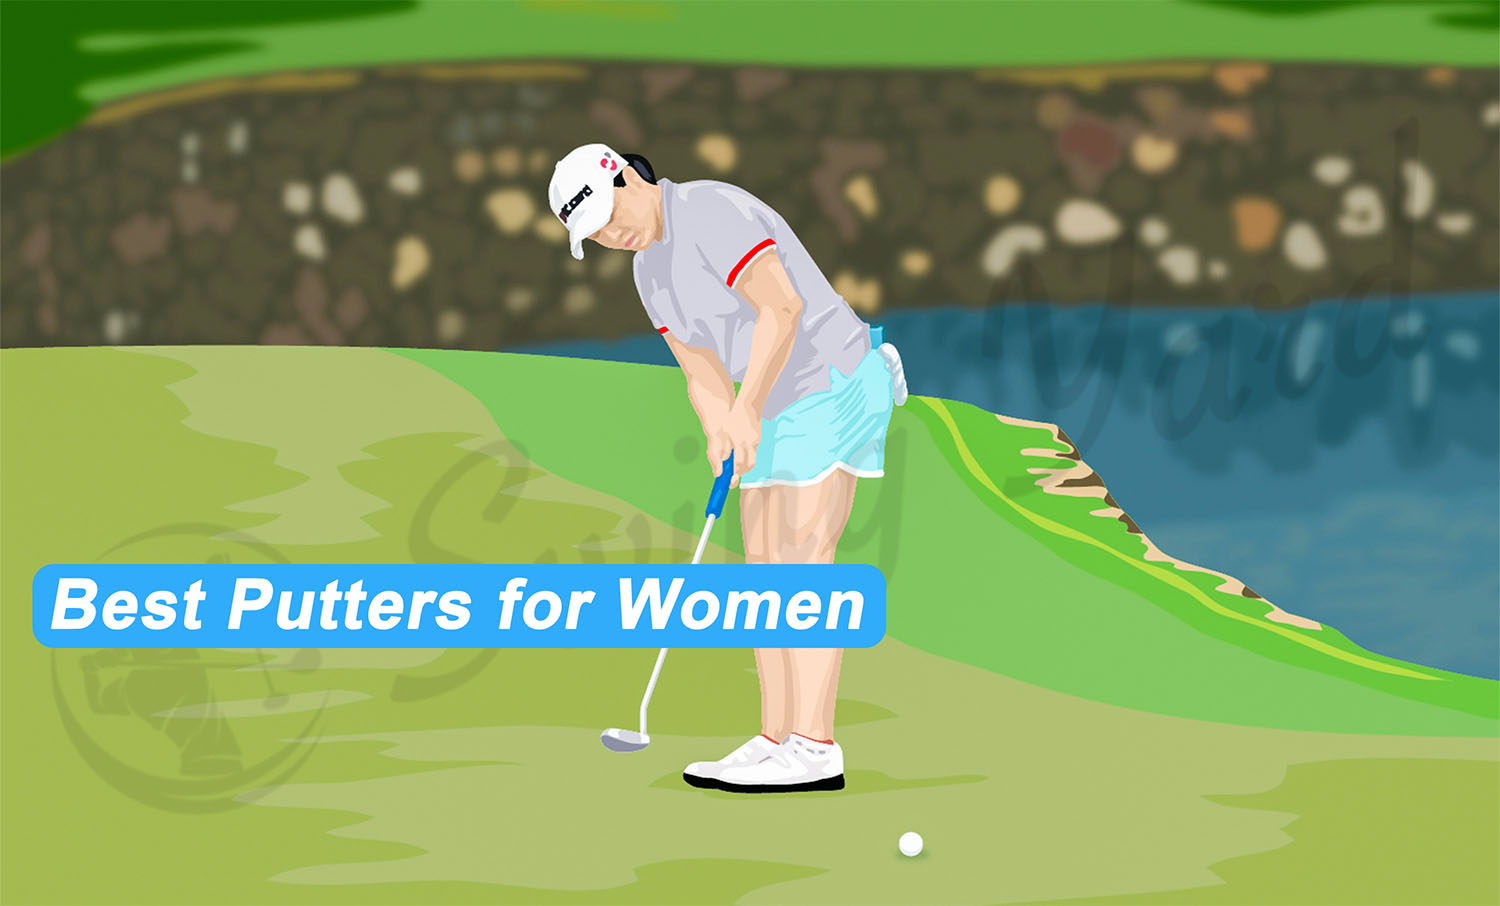 A golfer hitting one of the best putters for women